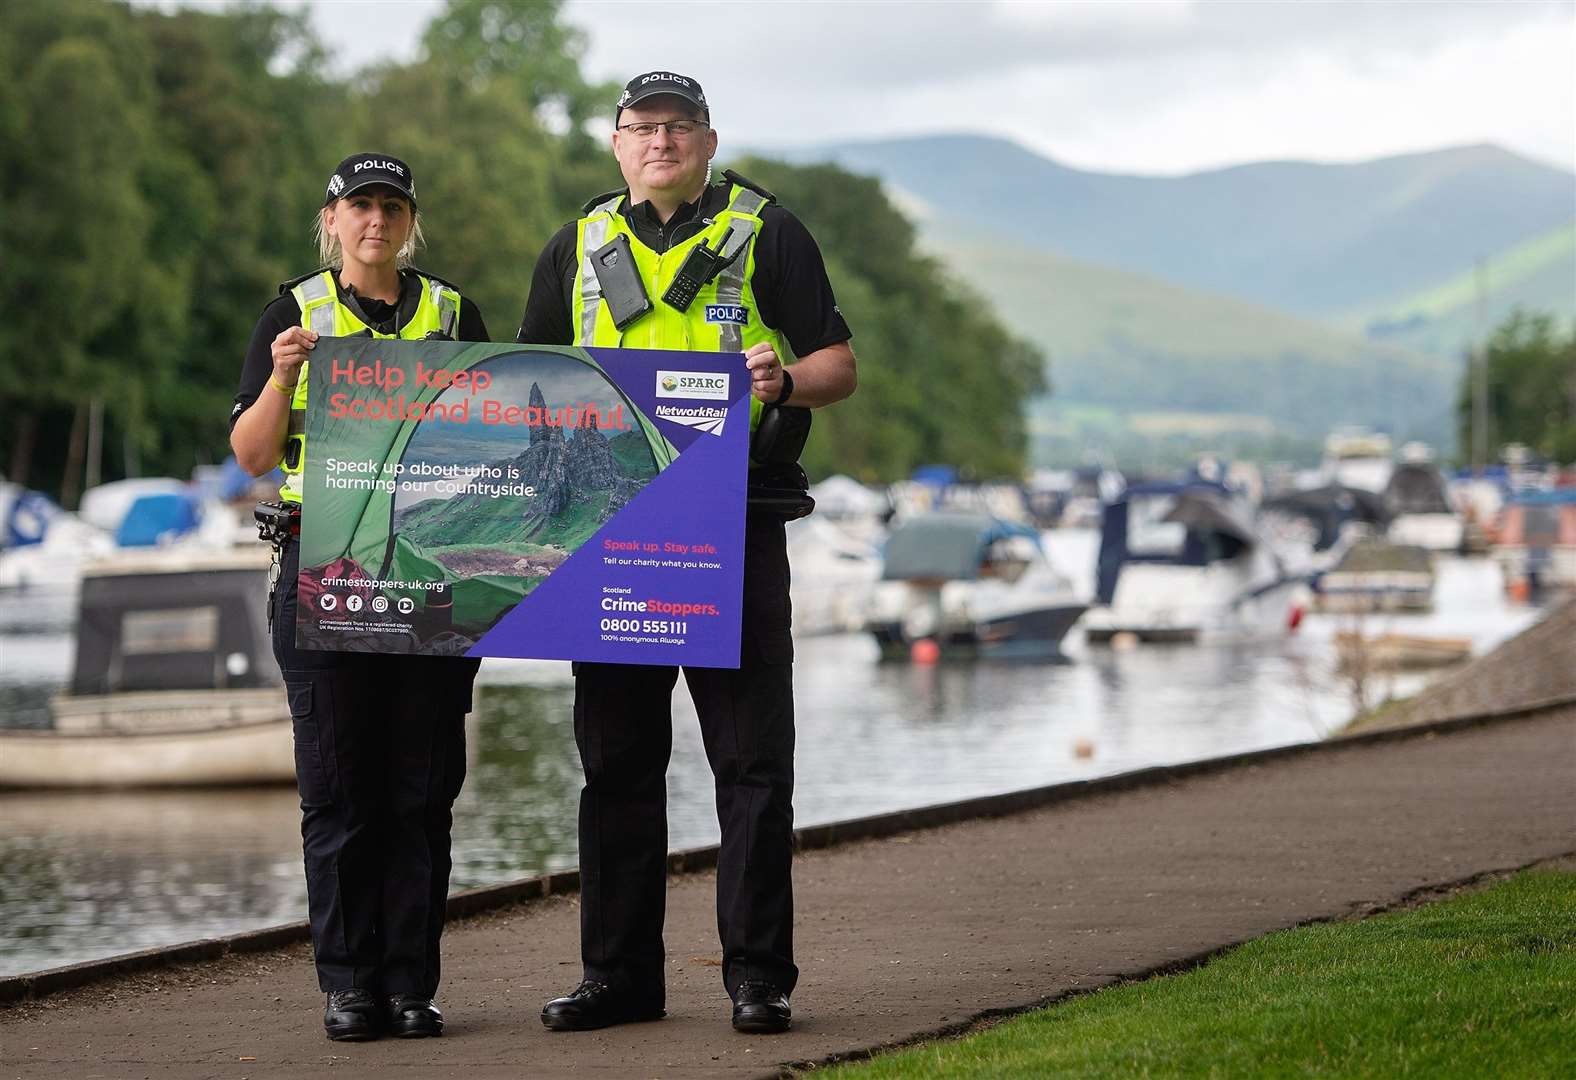 From left, PC Galbraith and PC Hardie in Balloch to launch a campaign urging Scots to speak up about those harming the countryside.